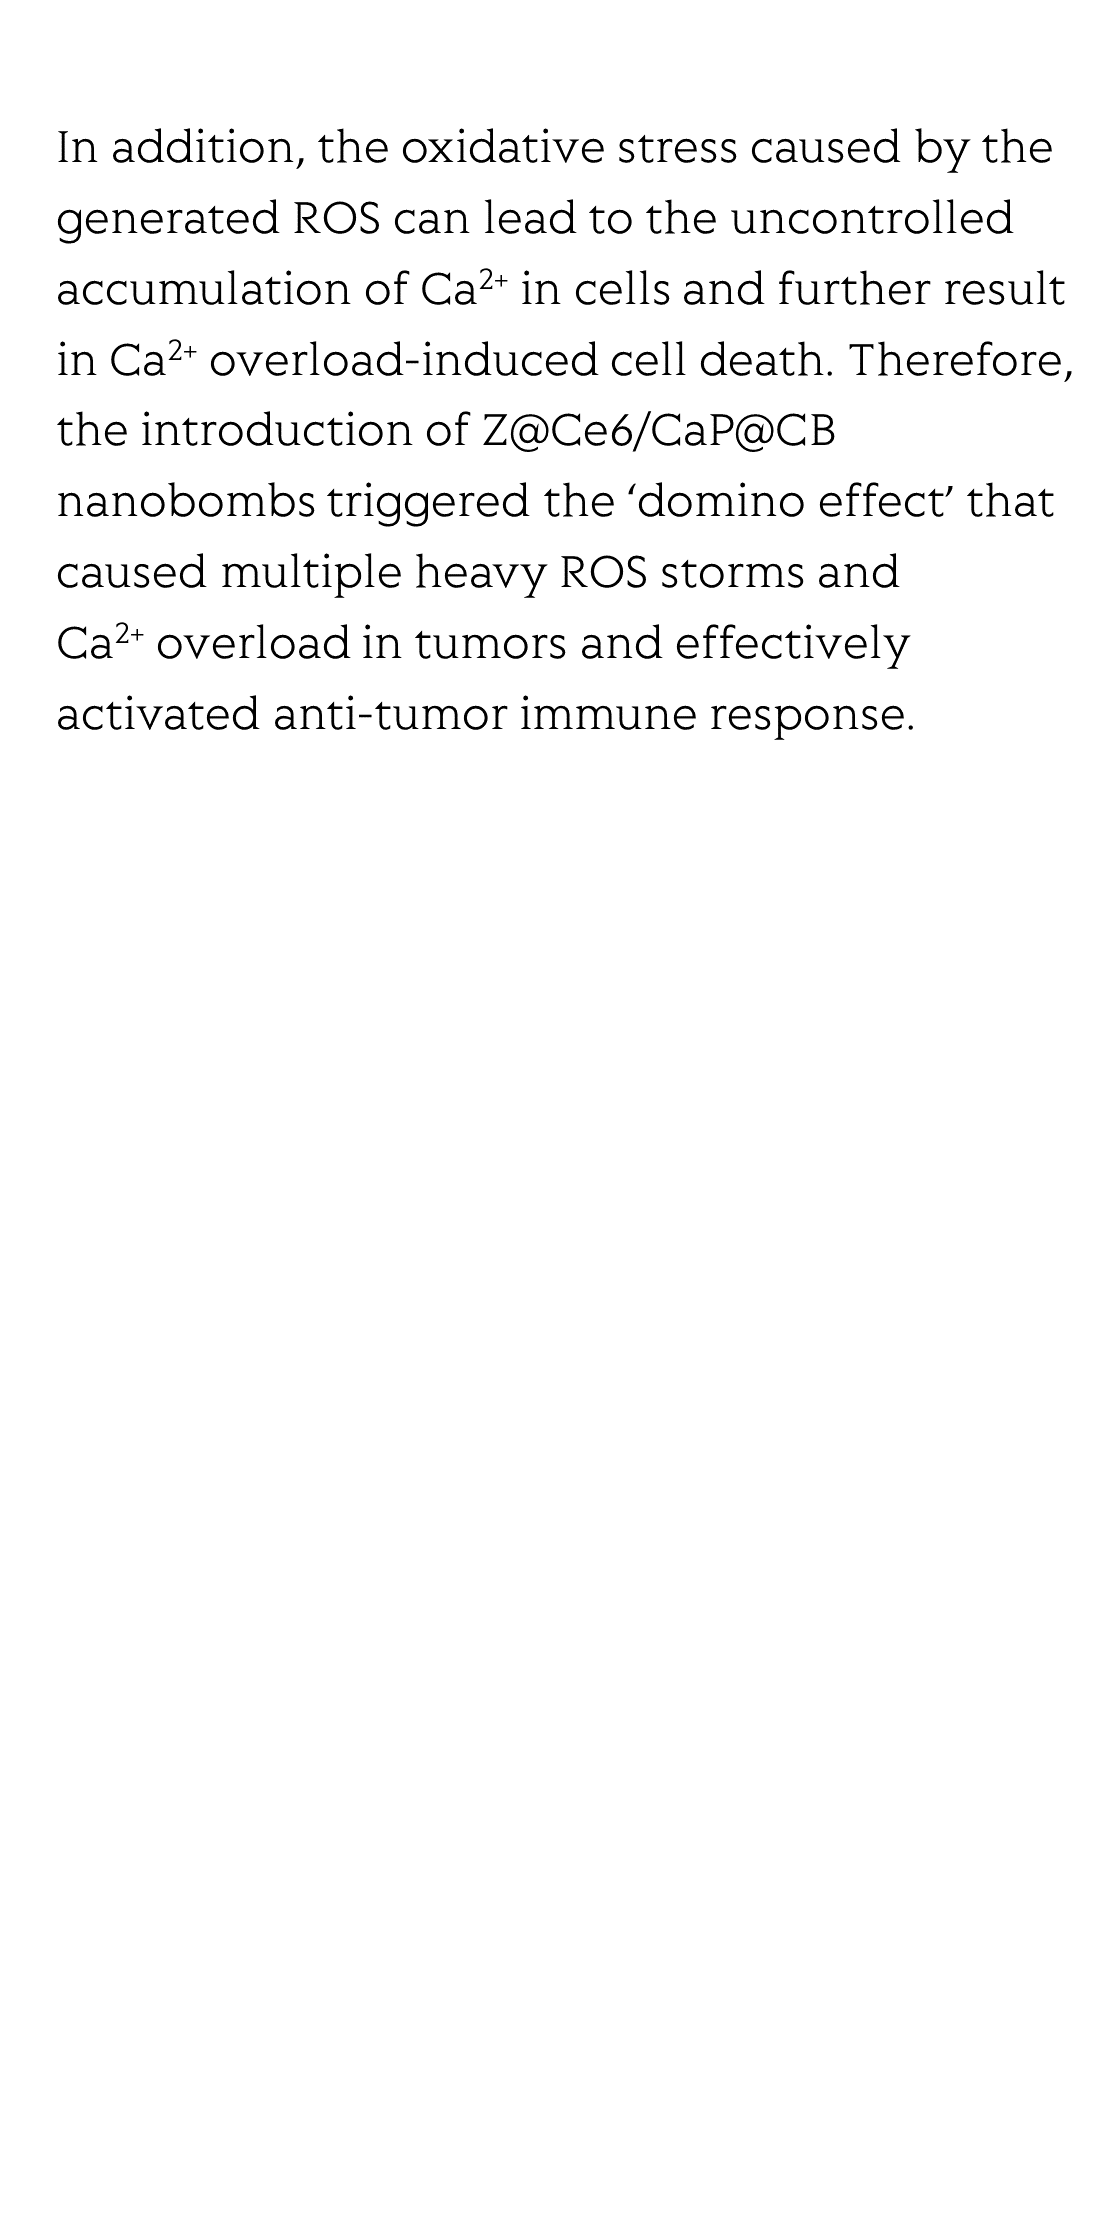 Cascade-responsive Nanobomb with domino effect for anti-tumor synergistic therapies_3